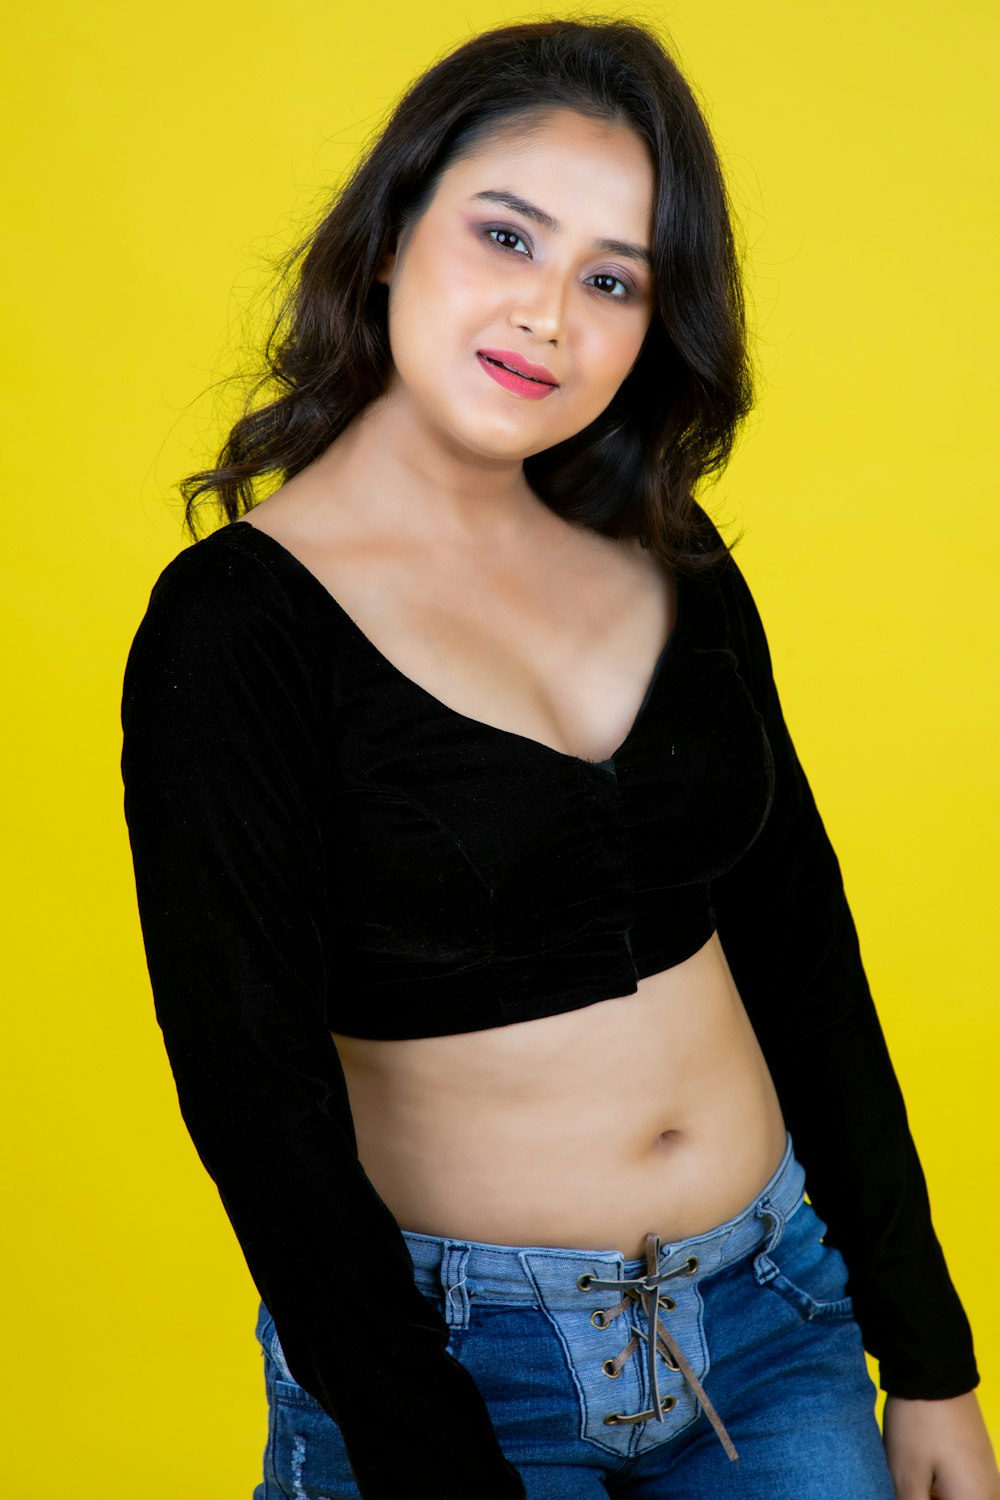 a woman posing for a picture with a yellow background